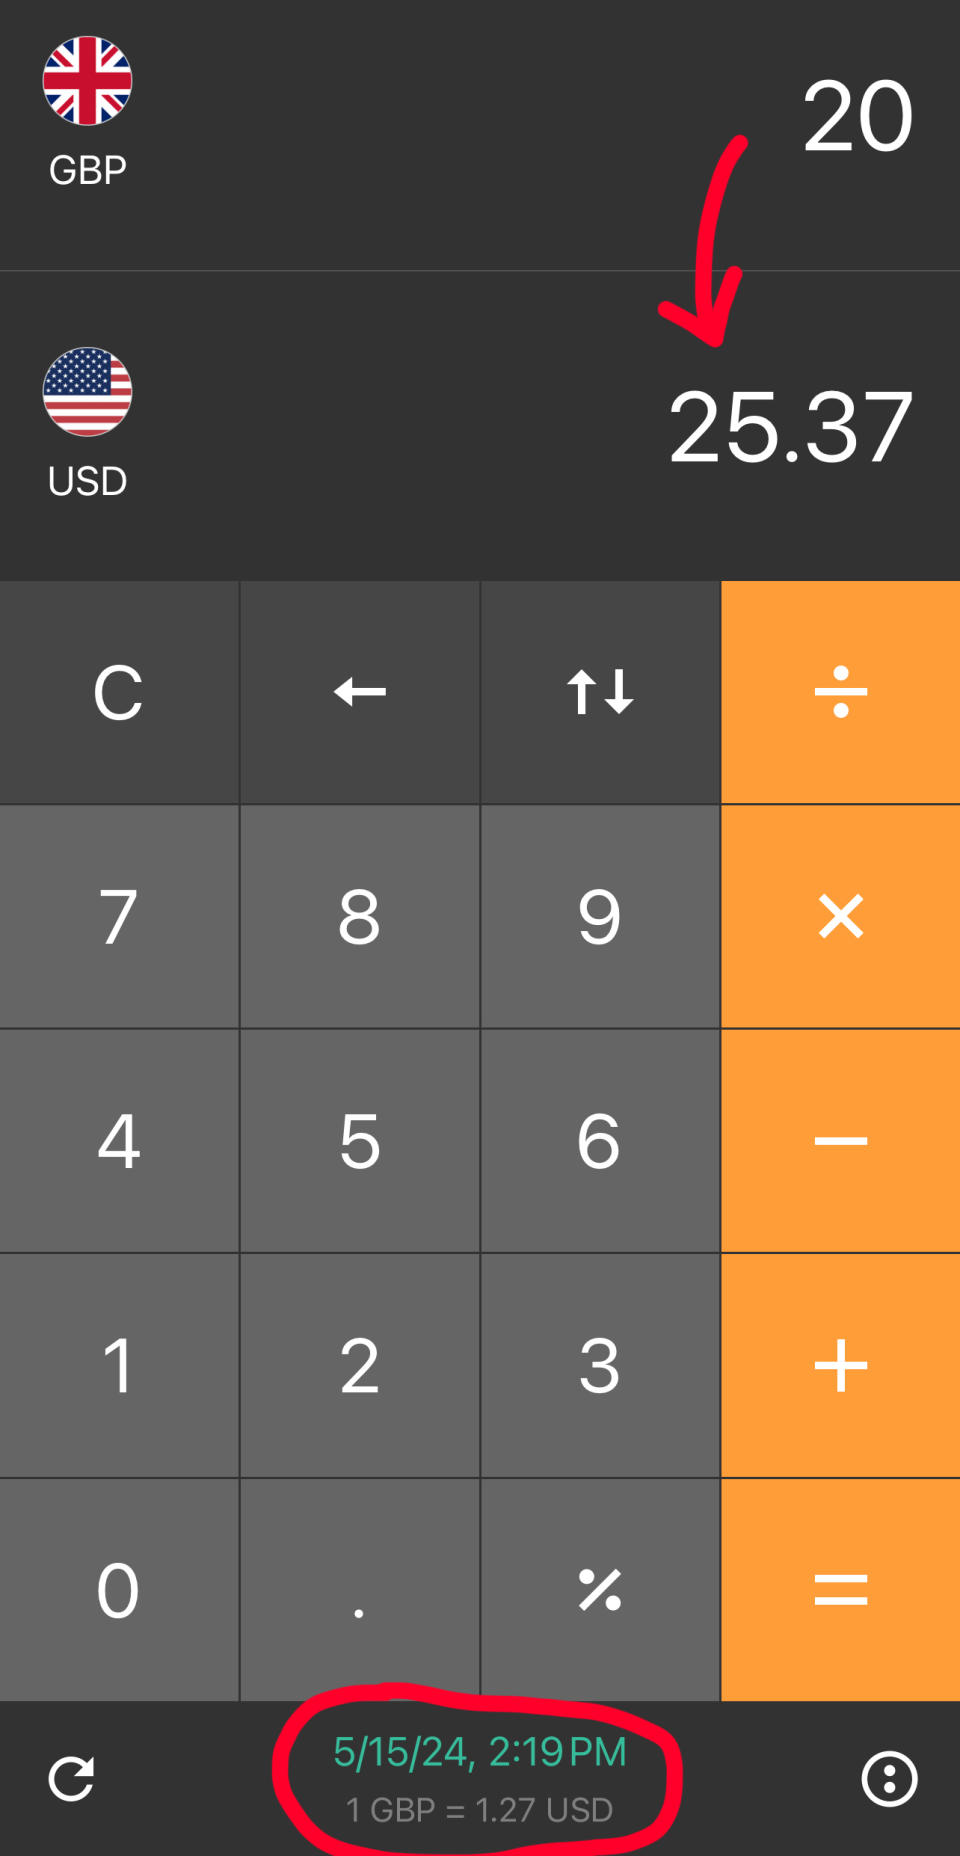 Currency conversion app showing 1 GBP equals 1.27 USD